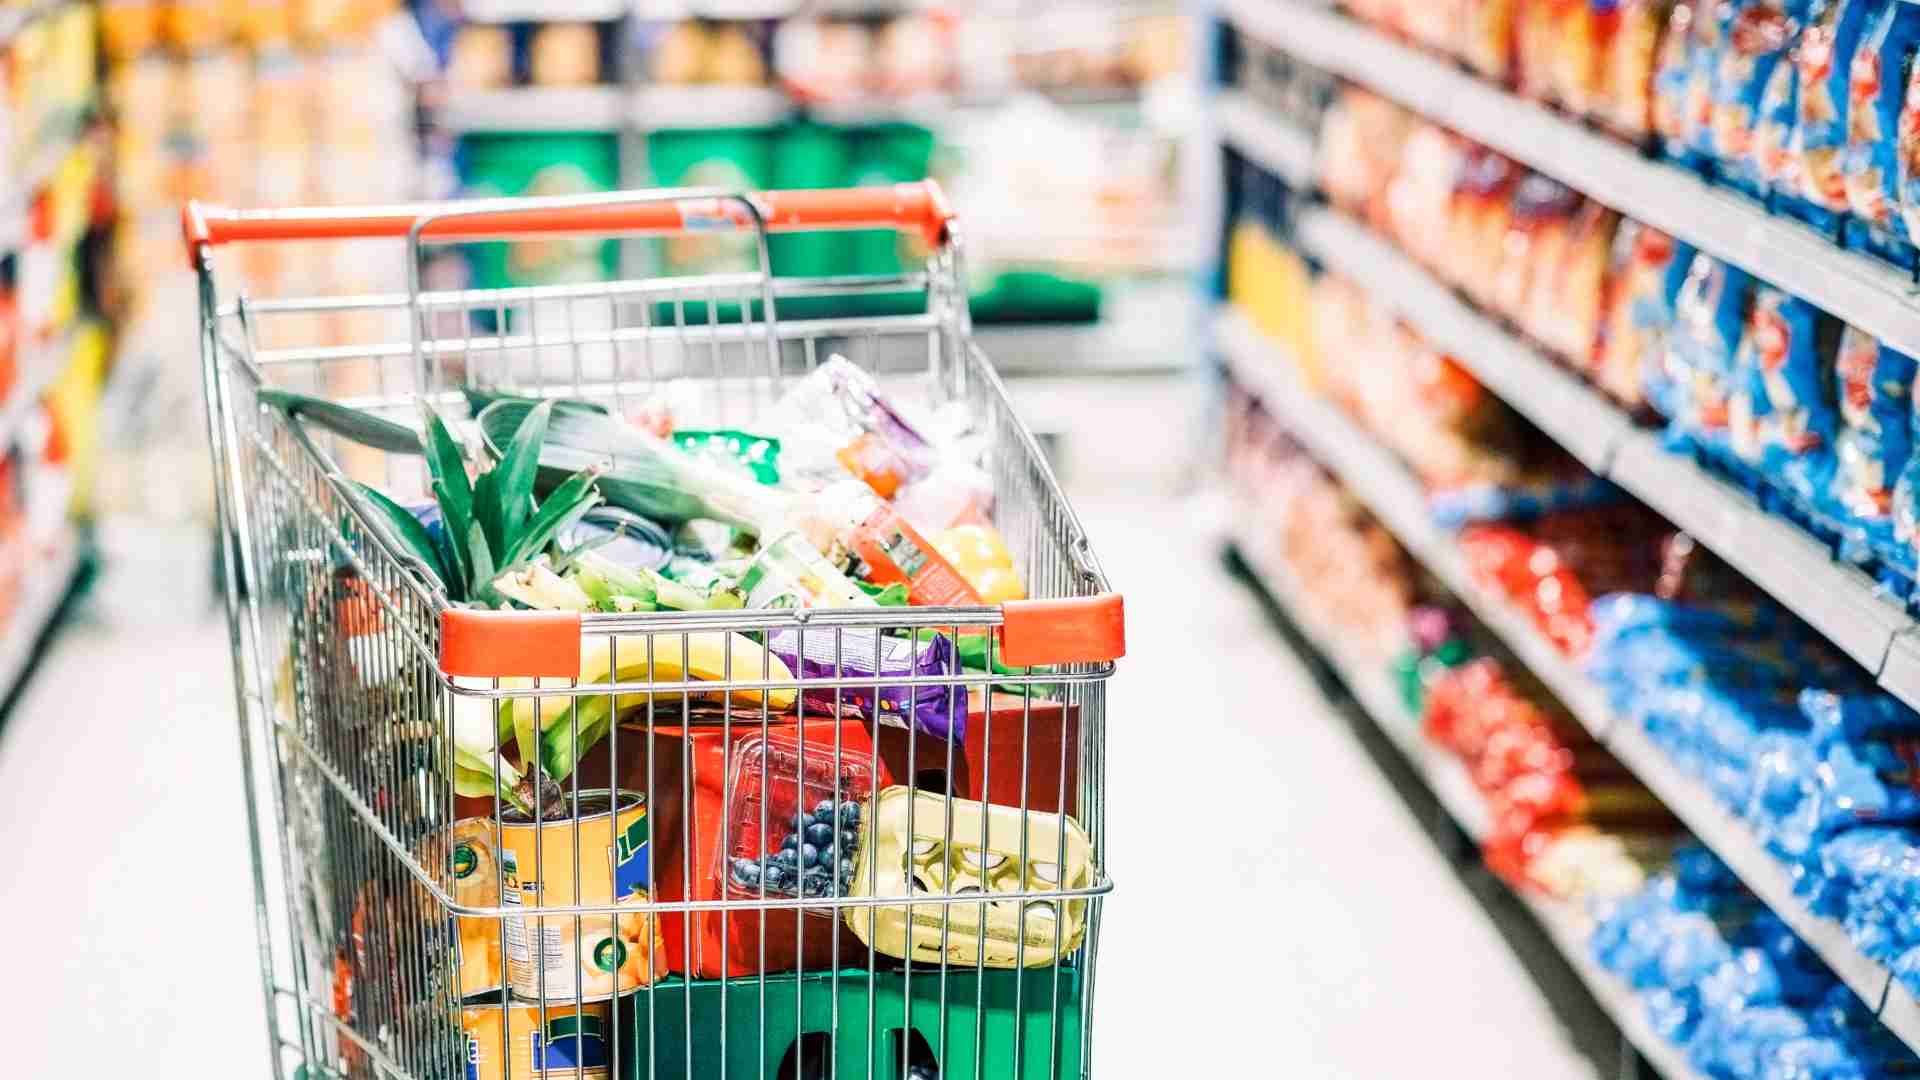 SNAP benefits will allow you to buy your groceries for less money, apply for Food Stamps if you have a low income